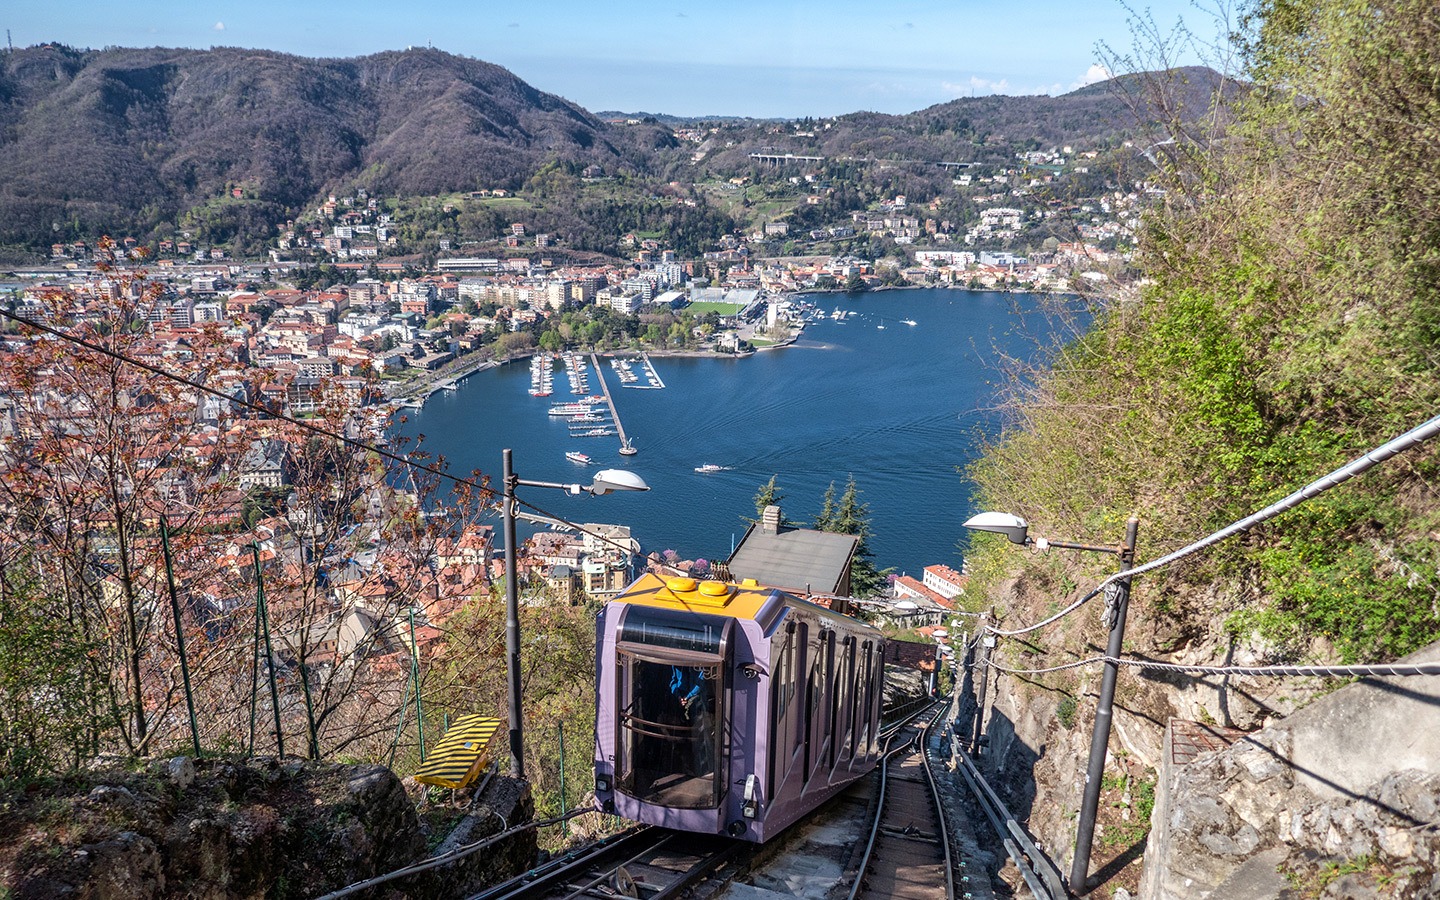 The funicular railway from Como city to Brunate